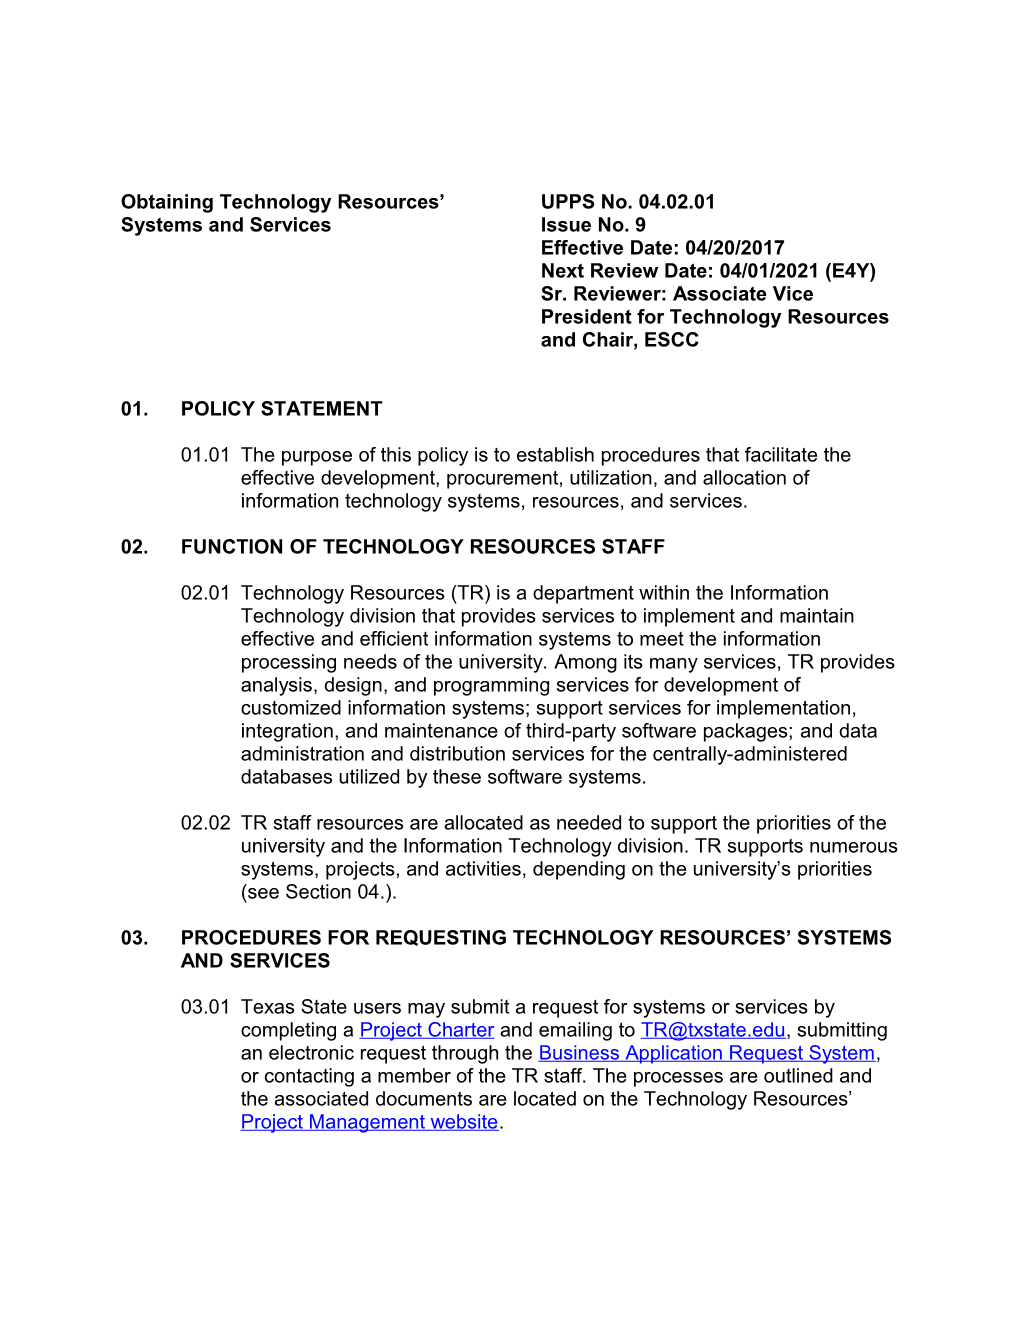 Obtaining Technology Resources UPPS No. 04.02.01